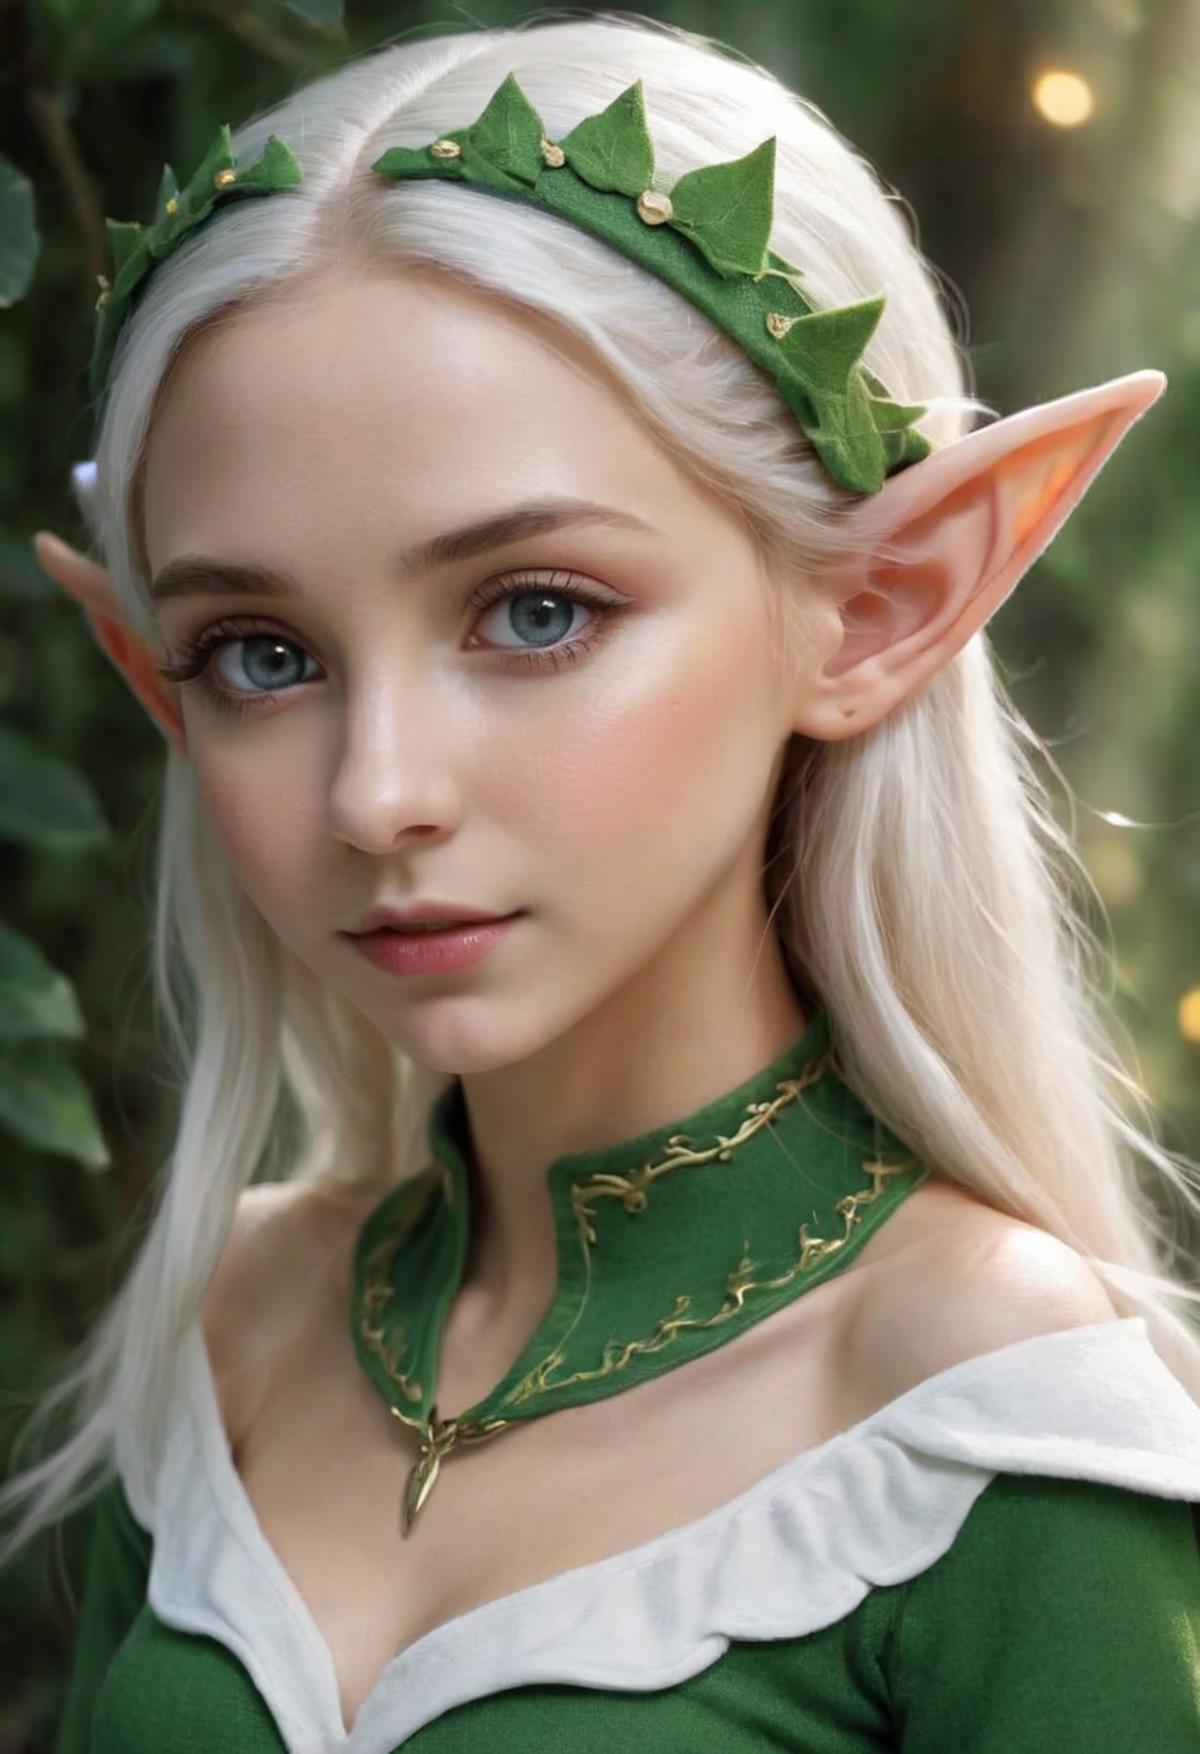 A young woman with an elven headband and green necklace poses in the woods.